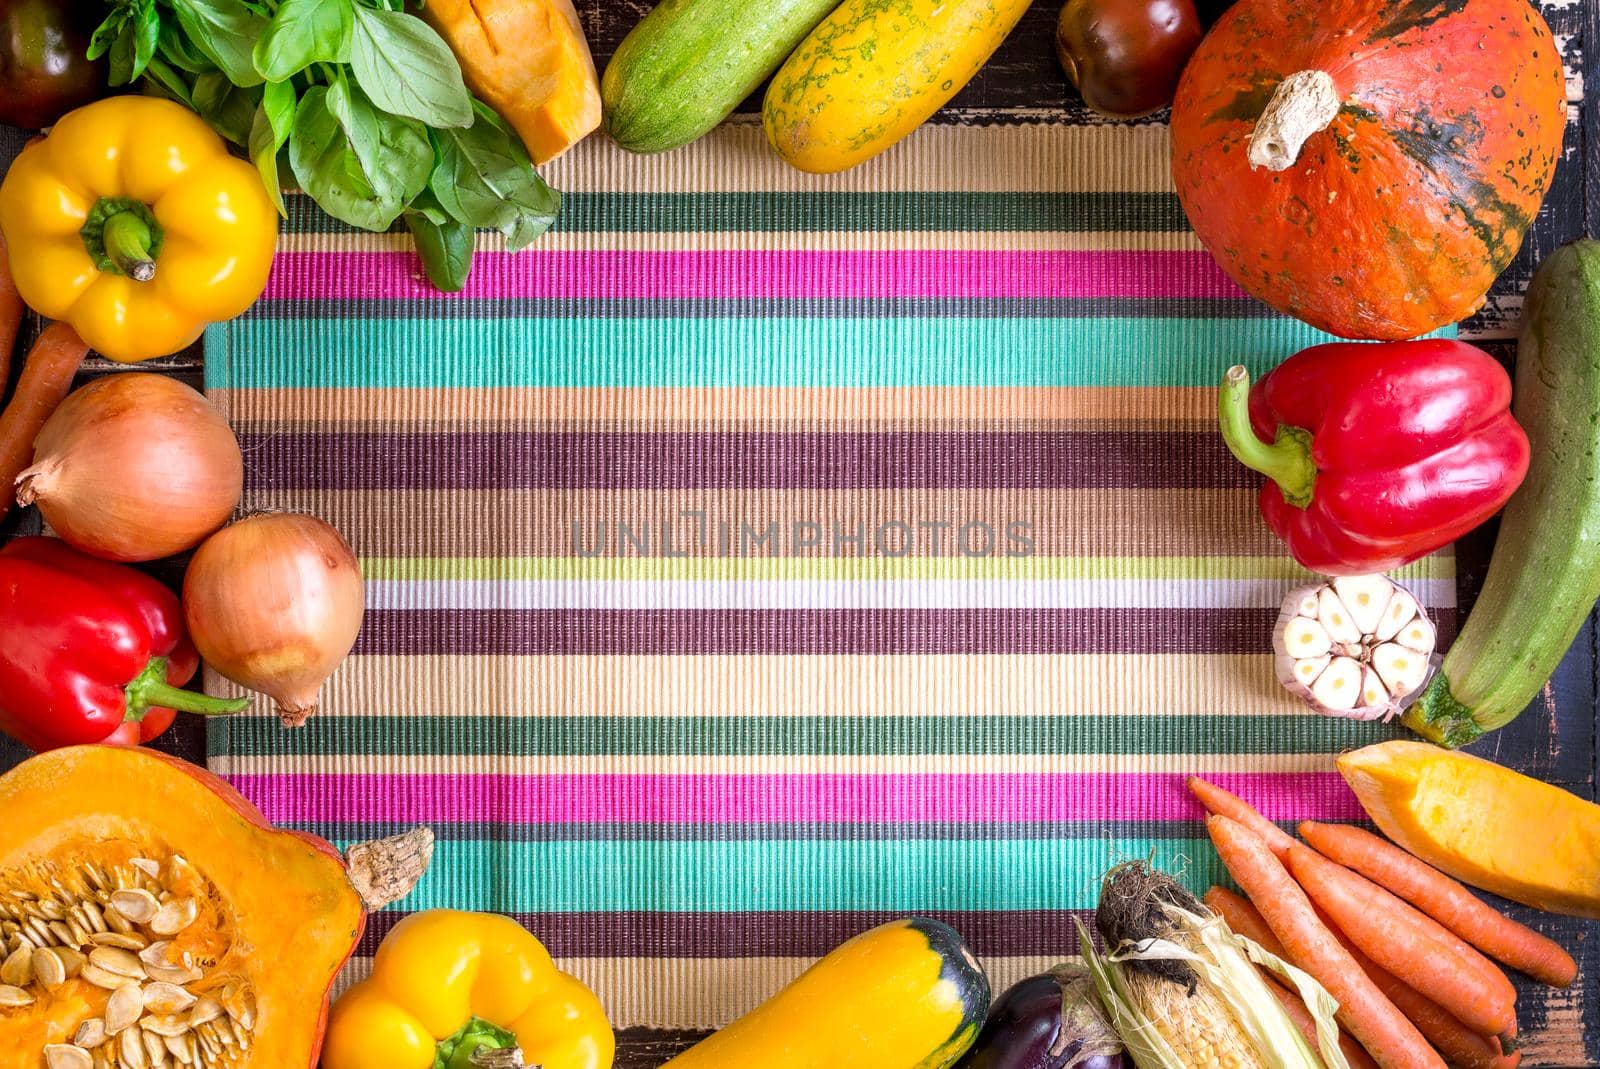 Fresh vegetables on a colorful striped kitchen towel. Autumn background by its_al_dente